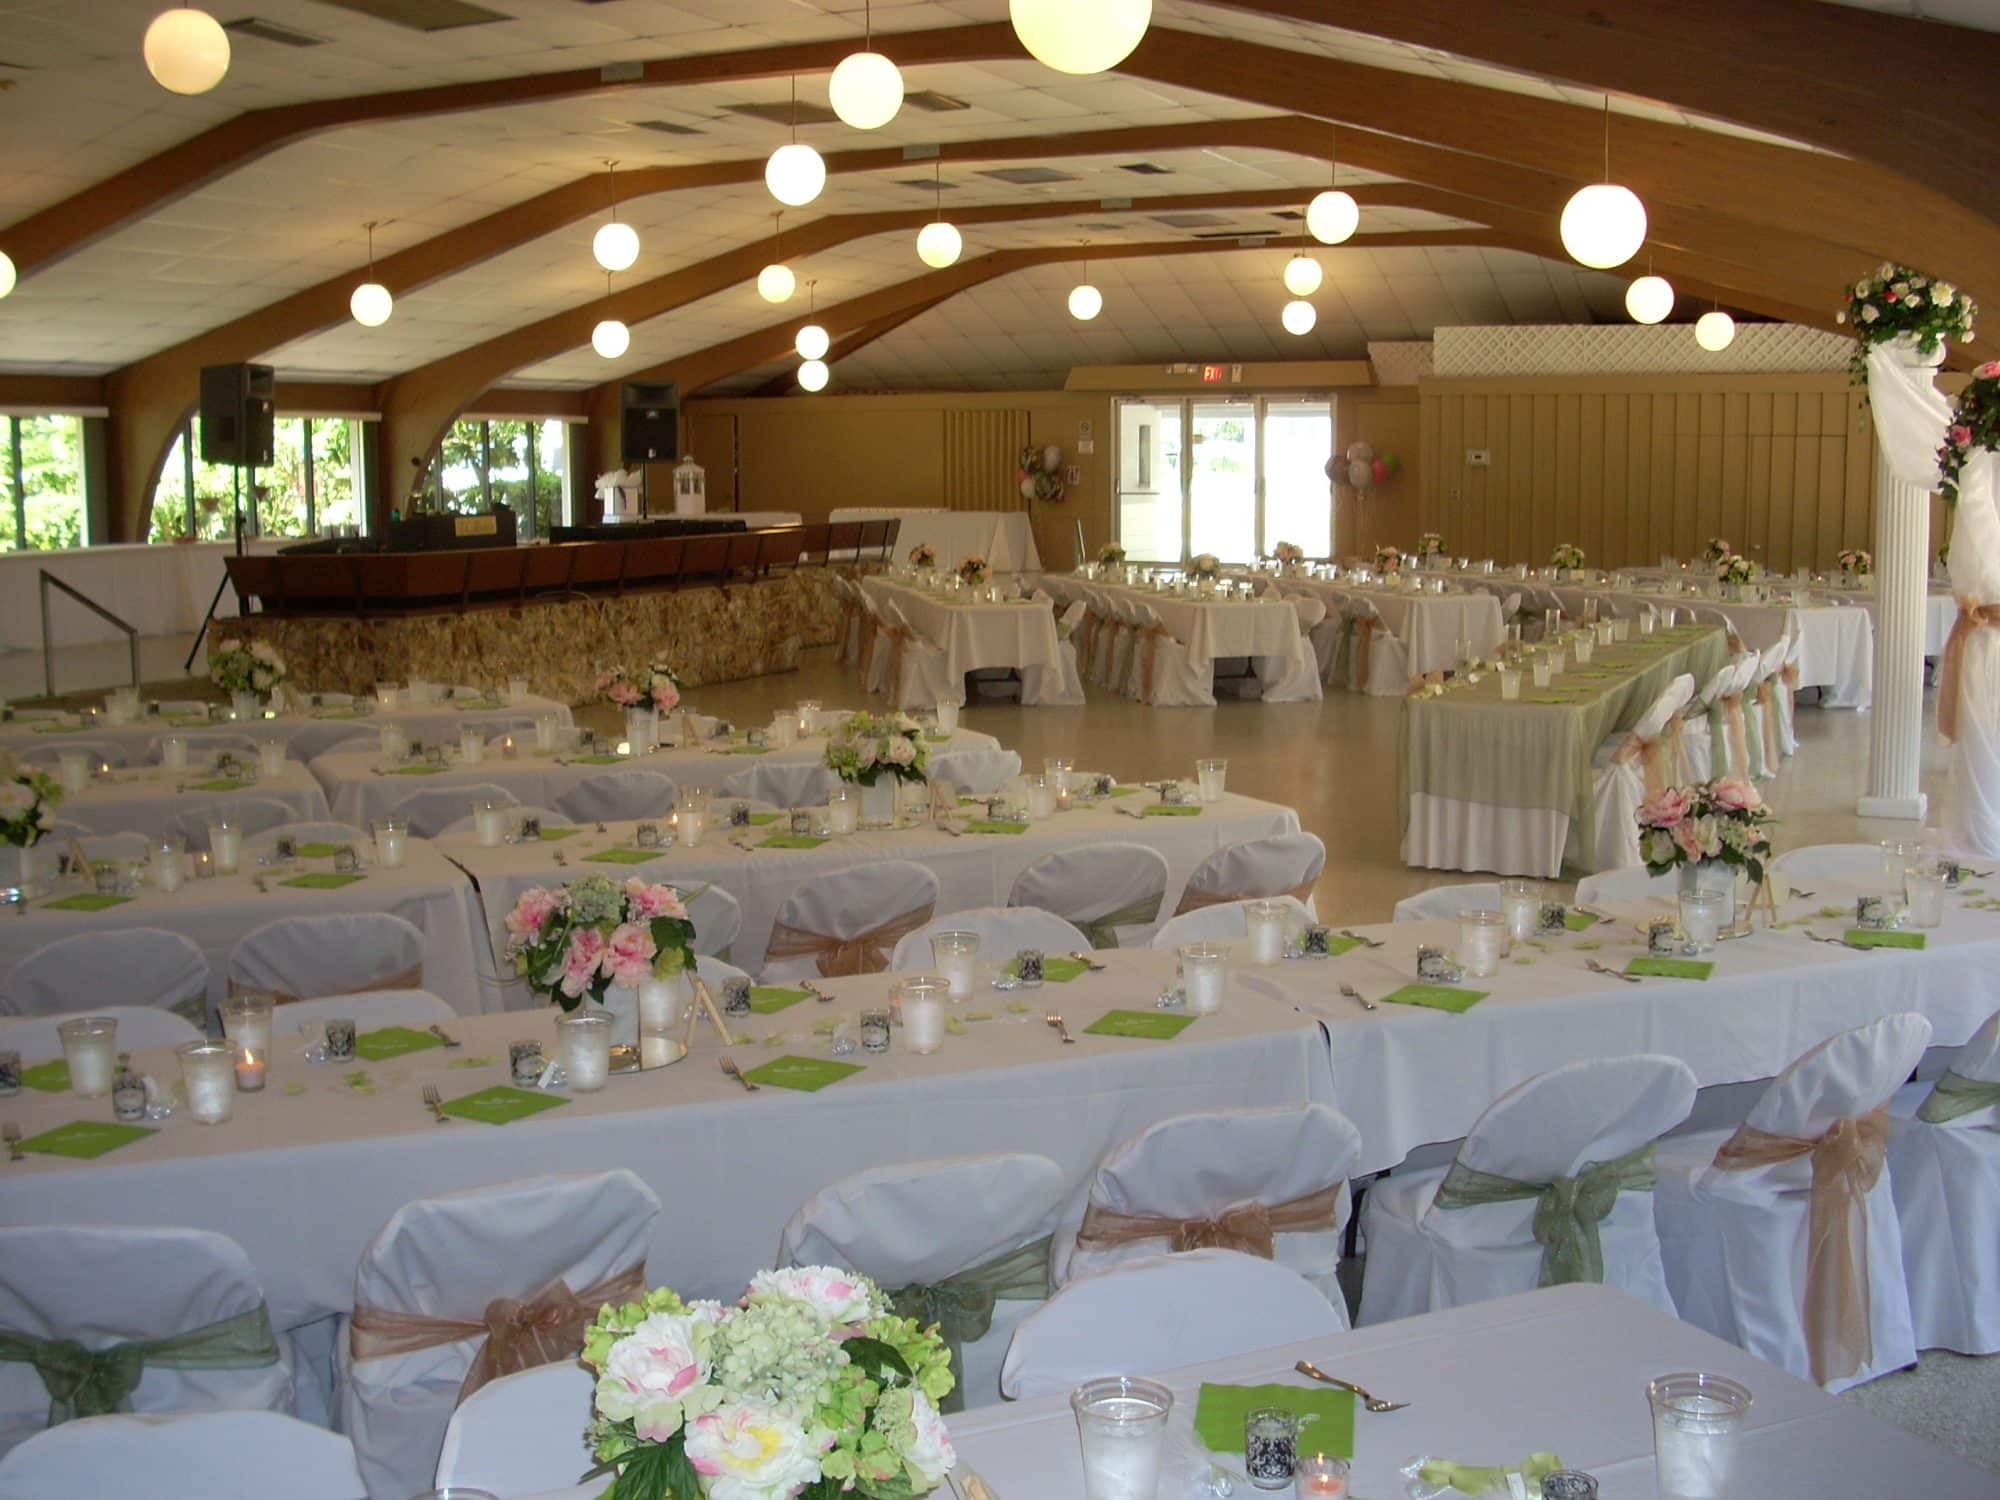 Venue on the Lake - long reception tables in hall with exposed, arched beams